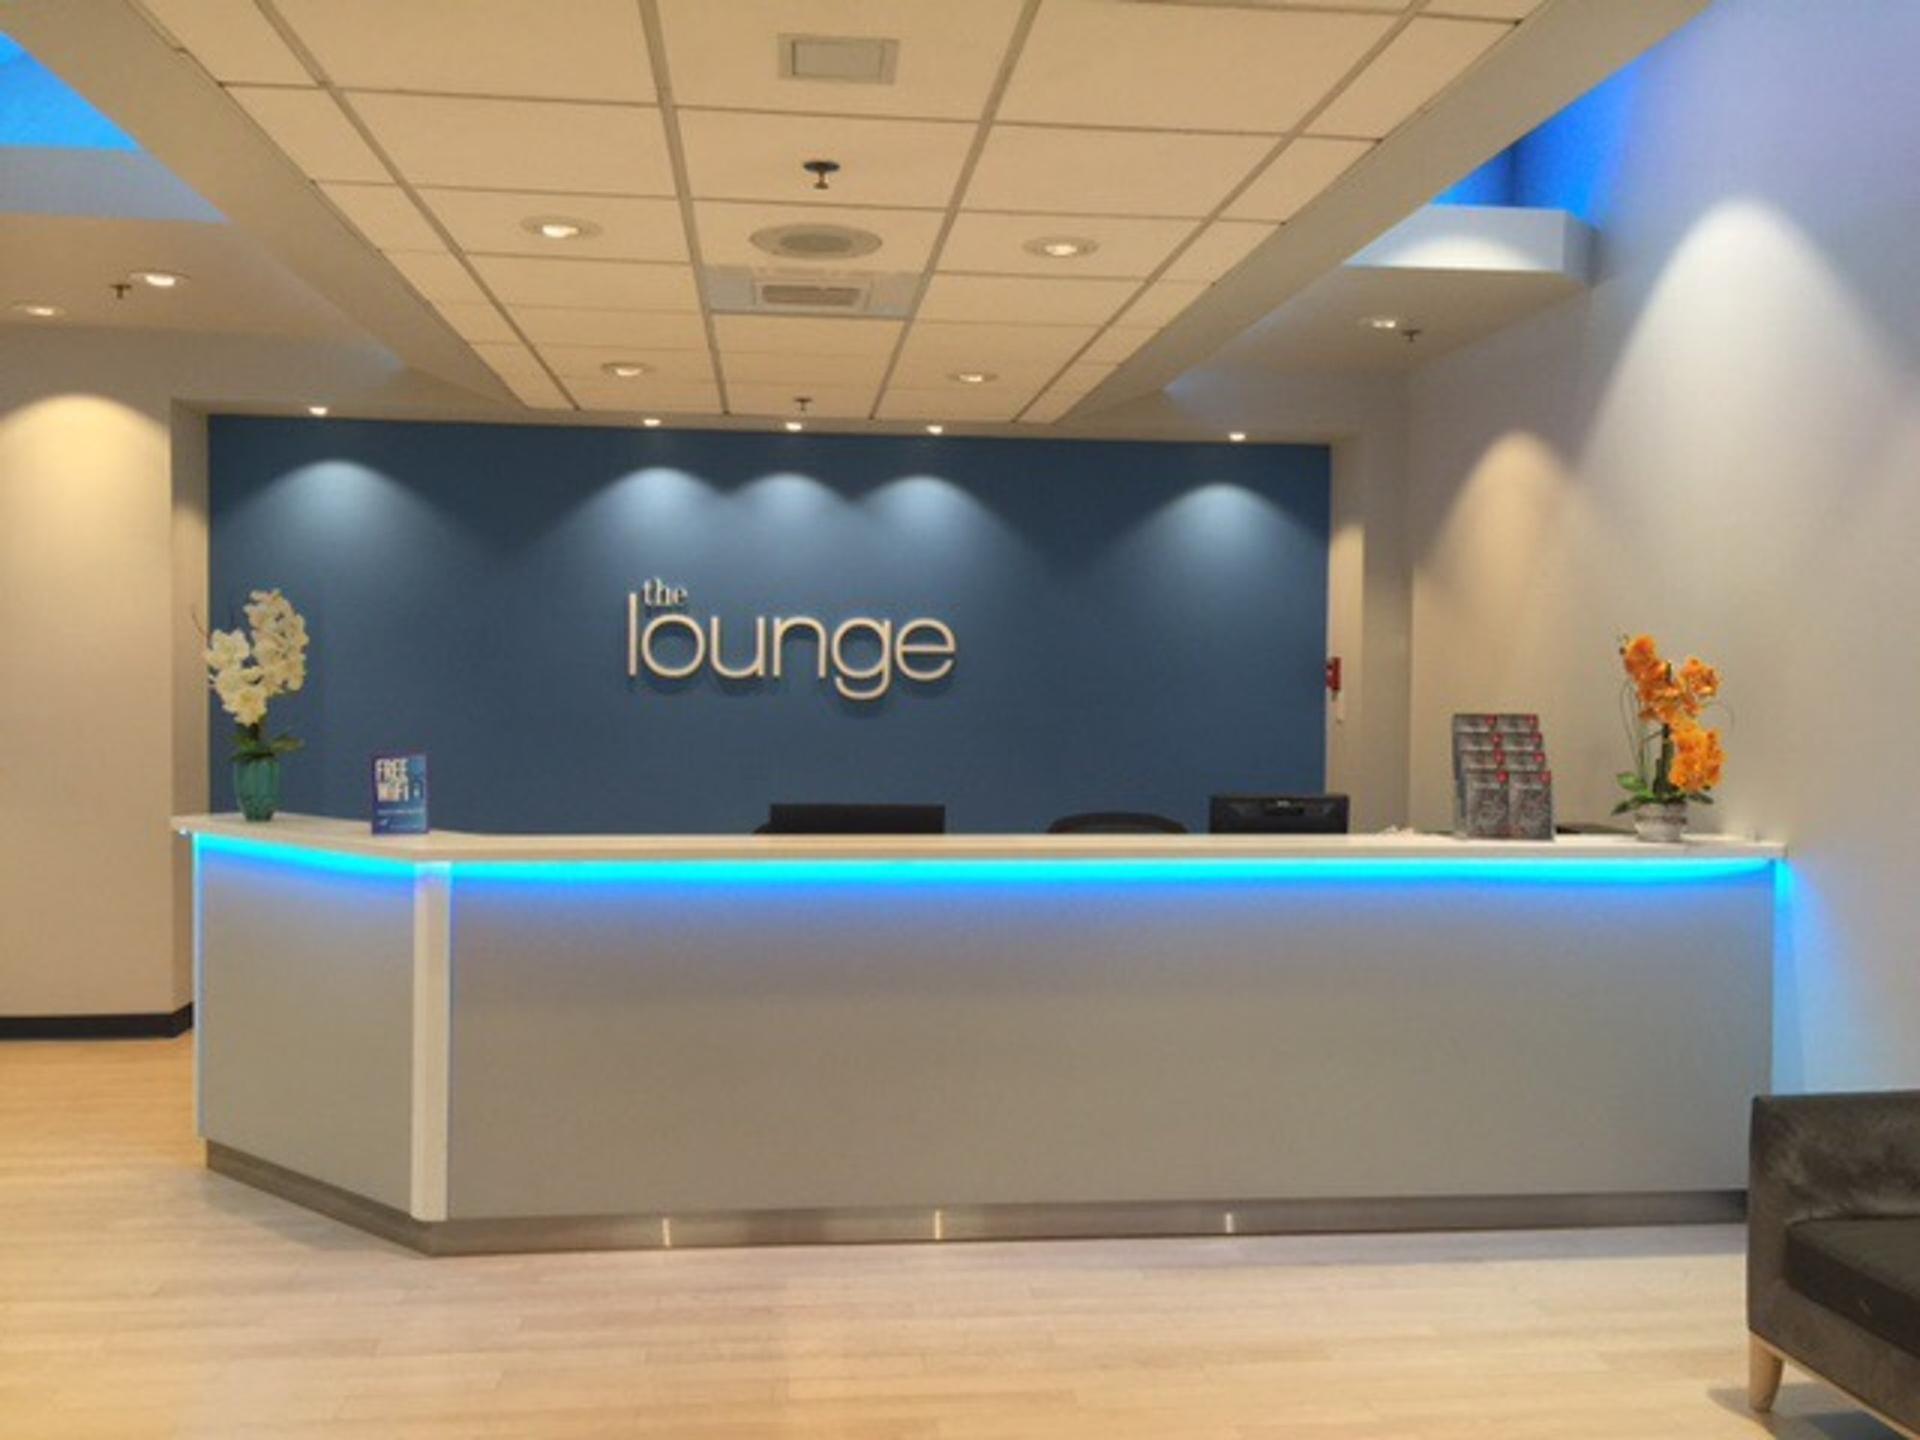 The Lounge BOS image 8 of 35